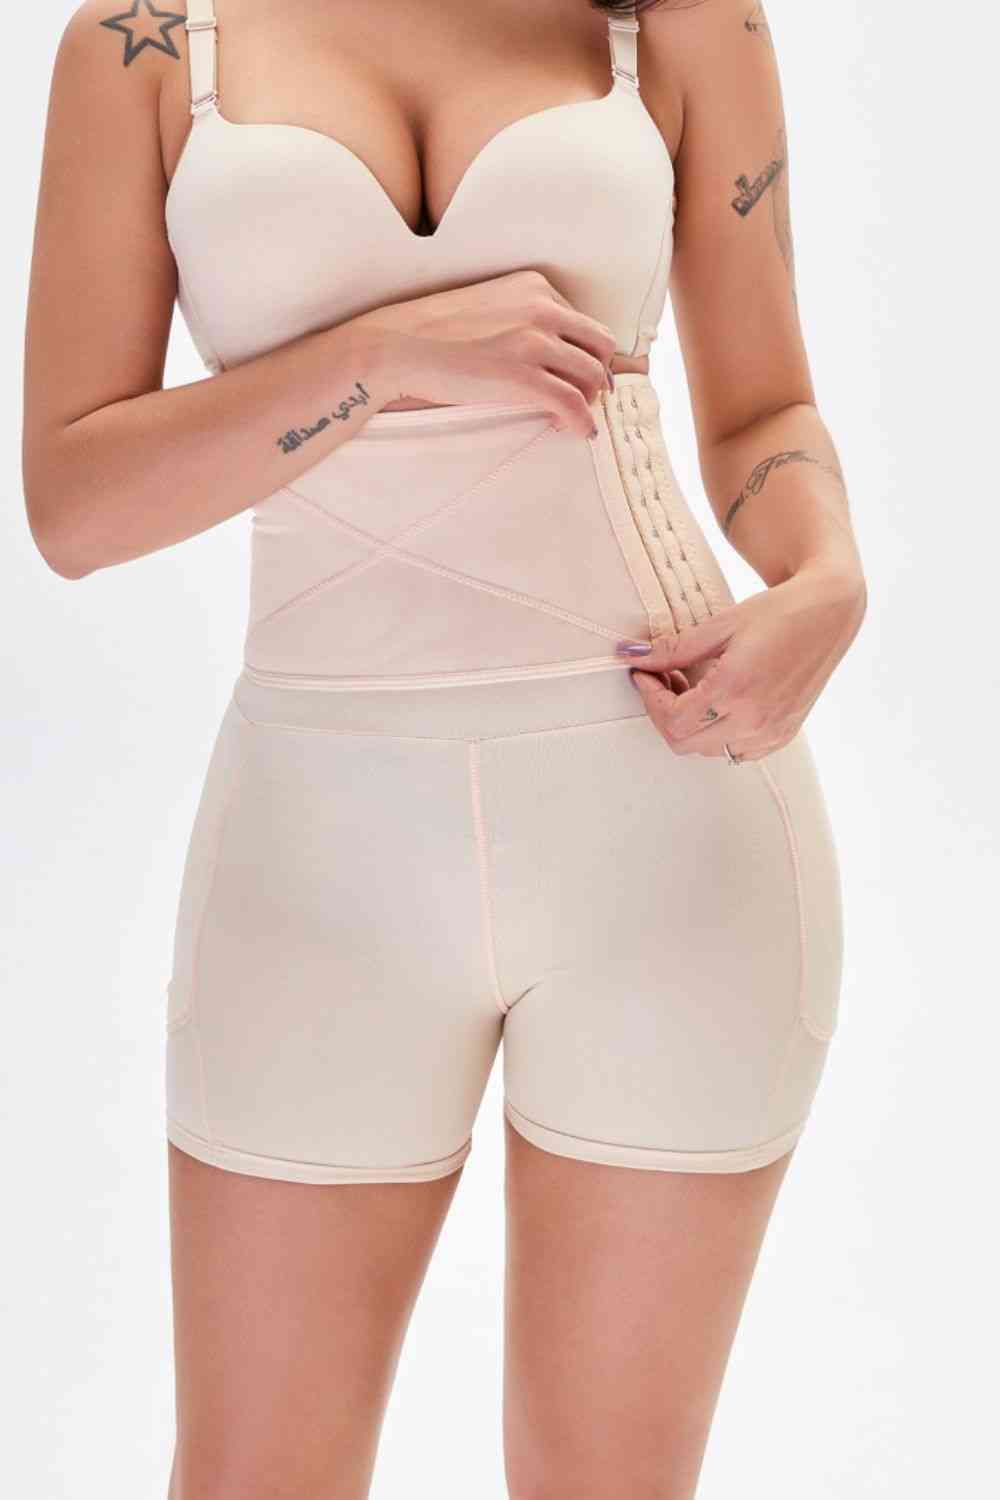 Full Size Hip Lifting Shaping Shorts  Sunset and Swim Apricot S 